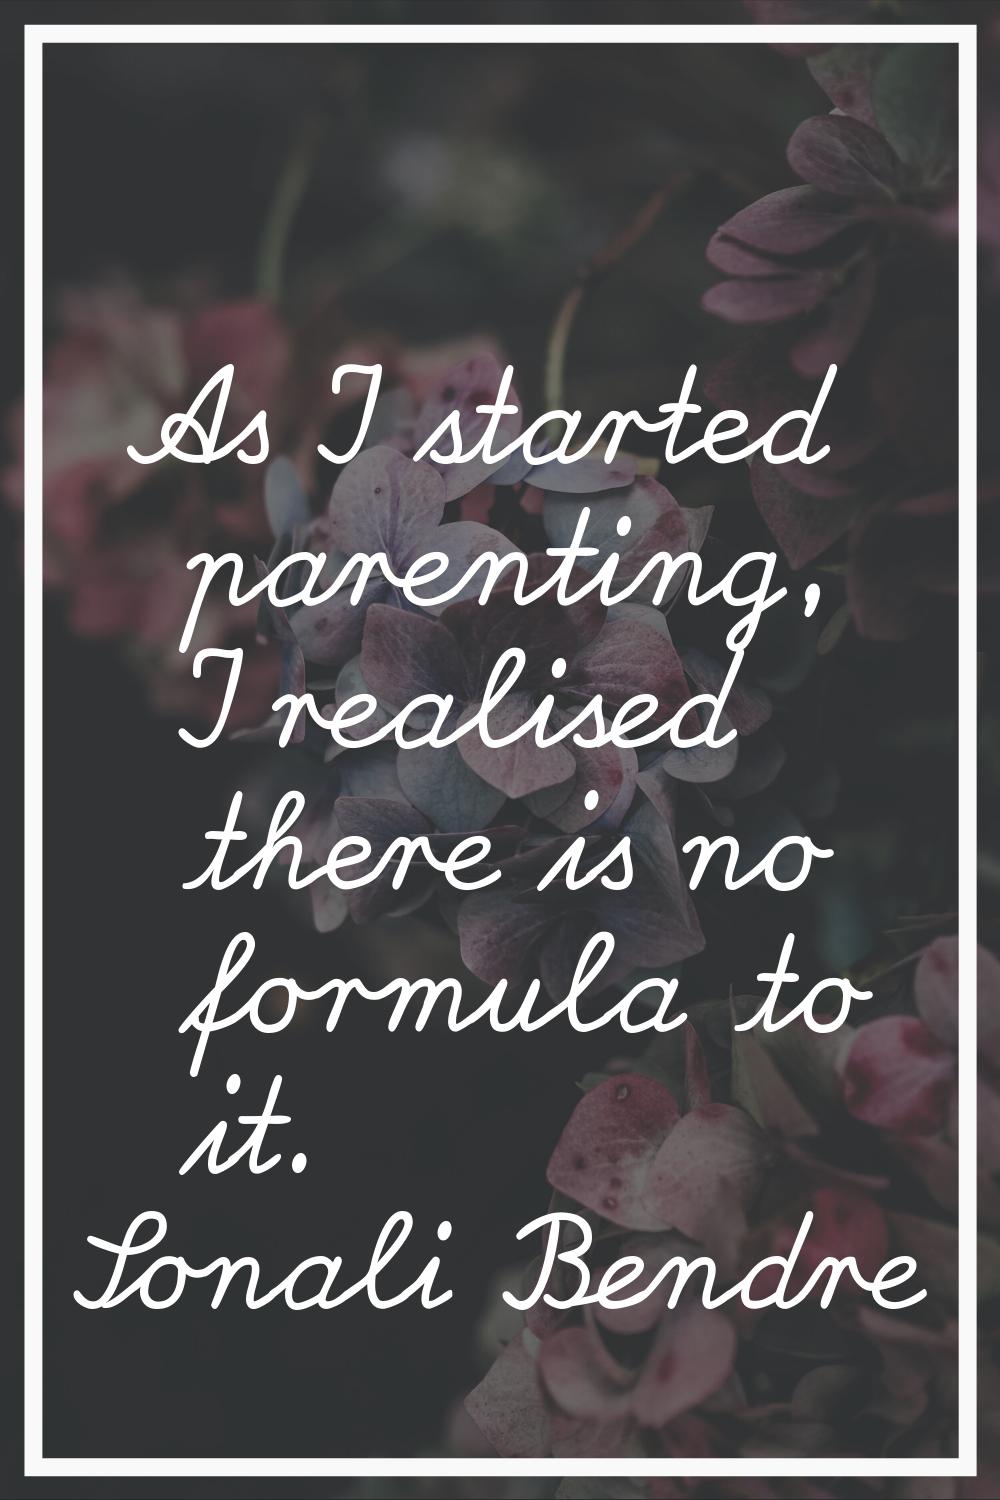 As I started parenting, I realised there is no formula to it.